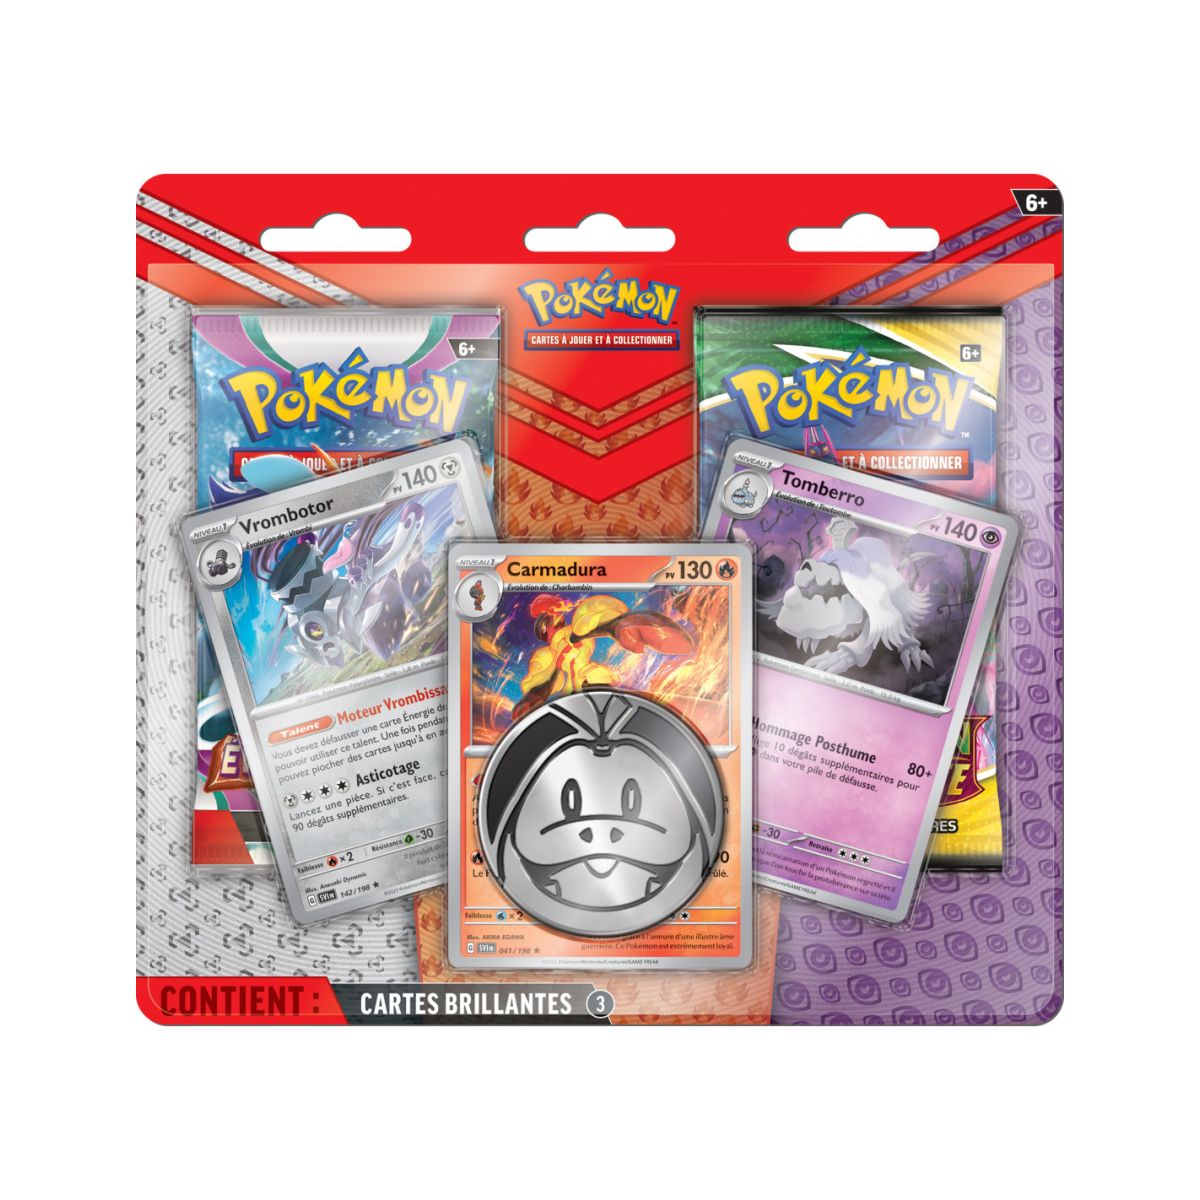 Pokémon Duo pack Celestial Evolution and Scarlet and Purple - 2 French boosters